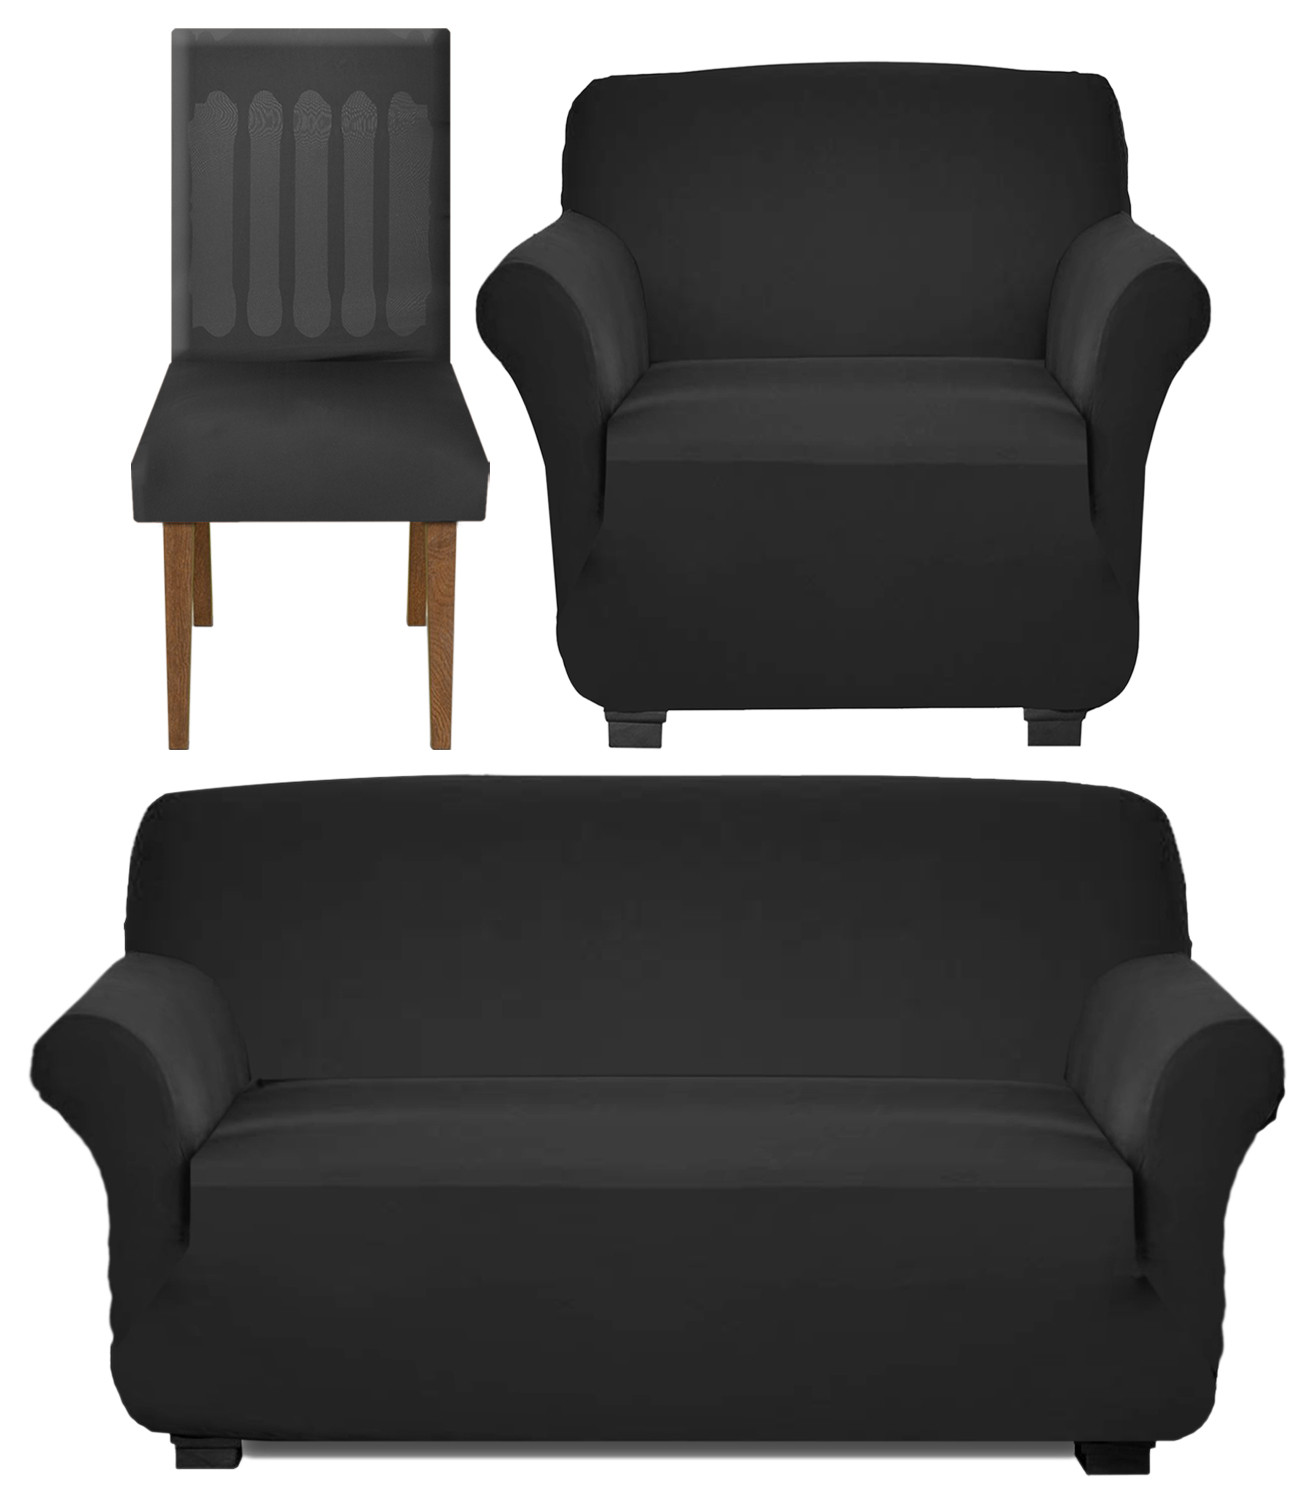 Kuber Industries Stretchable, Non-Slip Polyster 1 & 3 Seater Sofa Cover & Chair Cover Set, Set of 3 (Black)